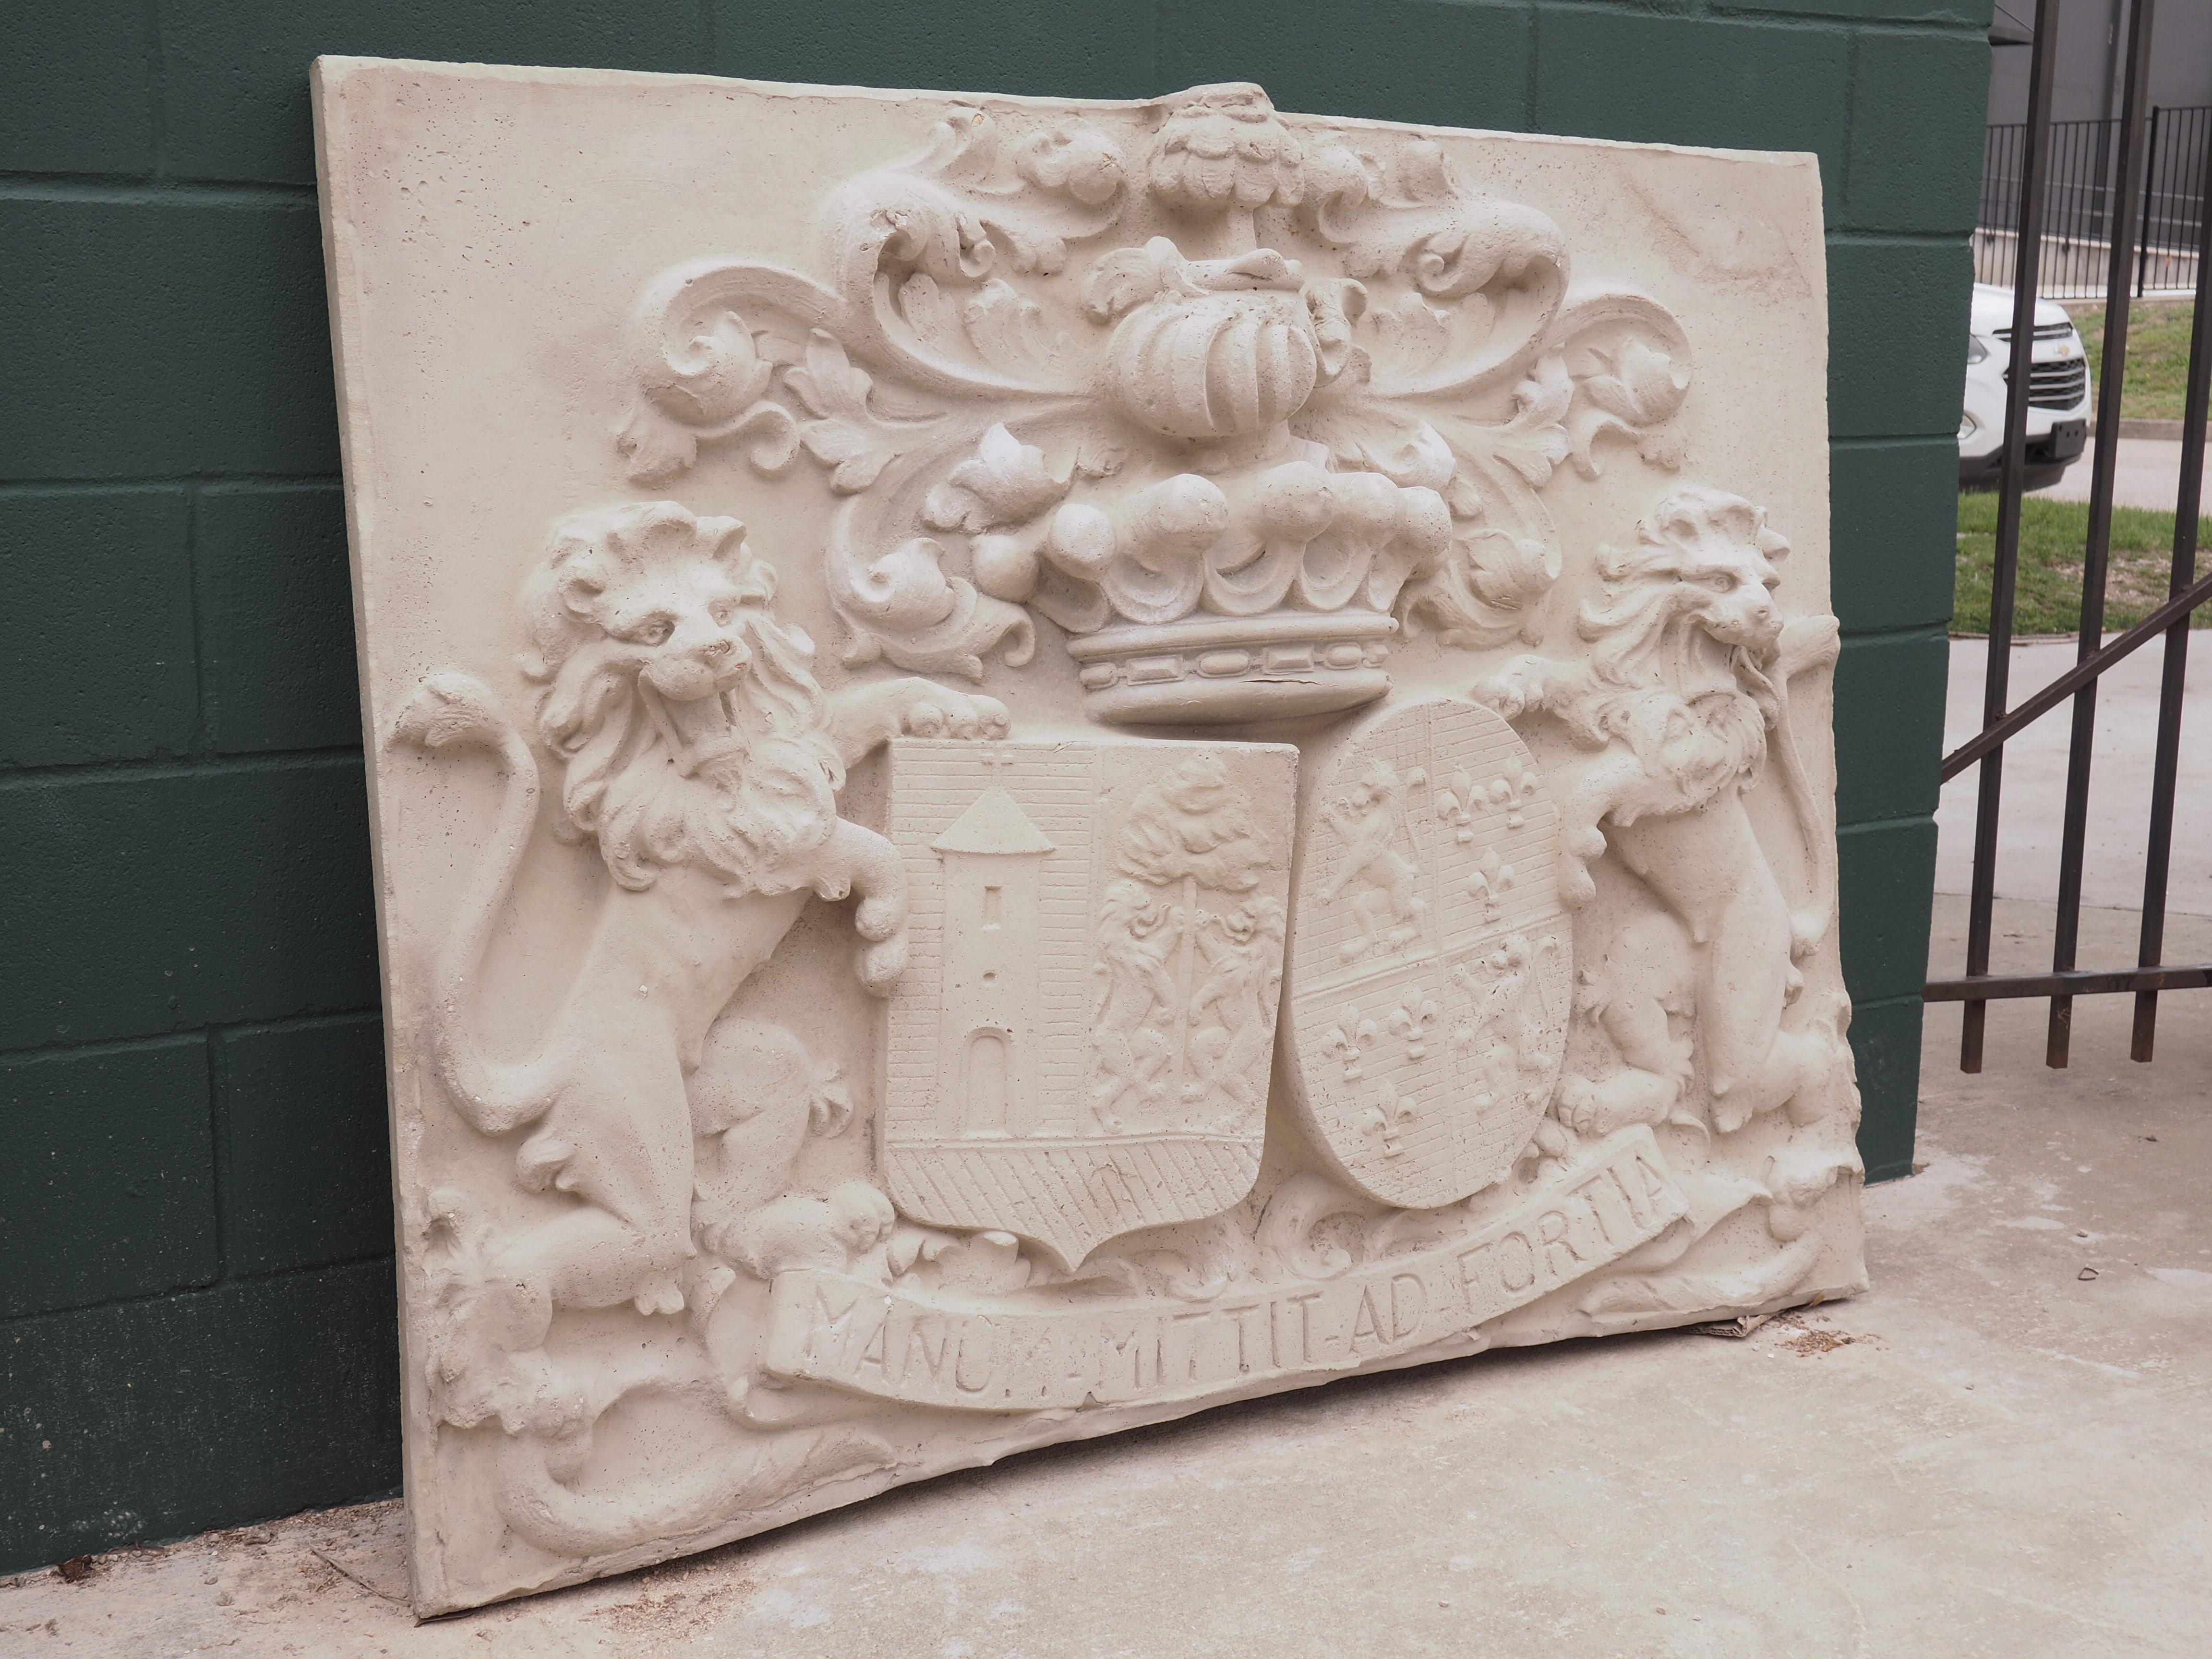 After a stone panel that once graced the front of a Belgian castle, this large cast stone plaque features an intricate coat of arms, quite possibly from the Crawhez family. The heraldic display was referenced in 1861 by Jean-Baptiste Rietstap, a